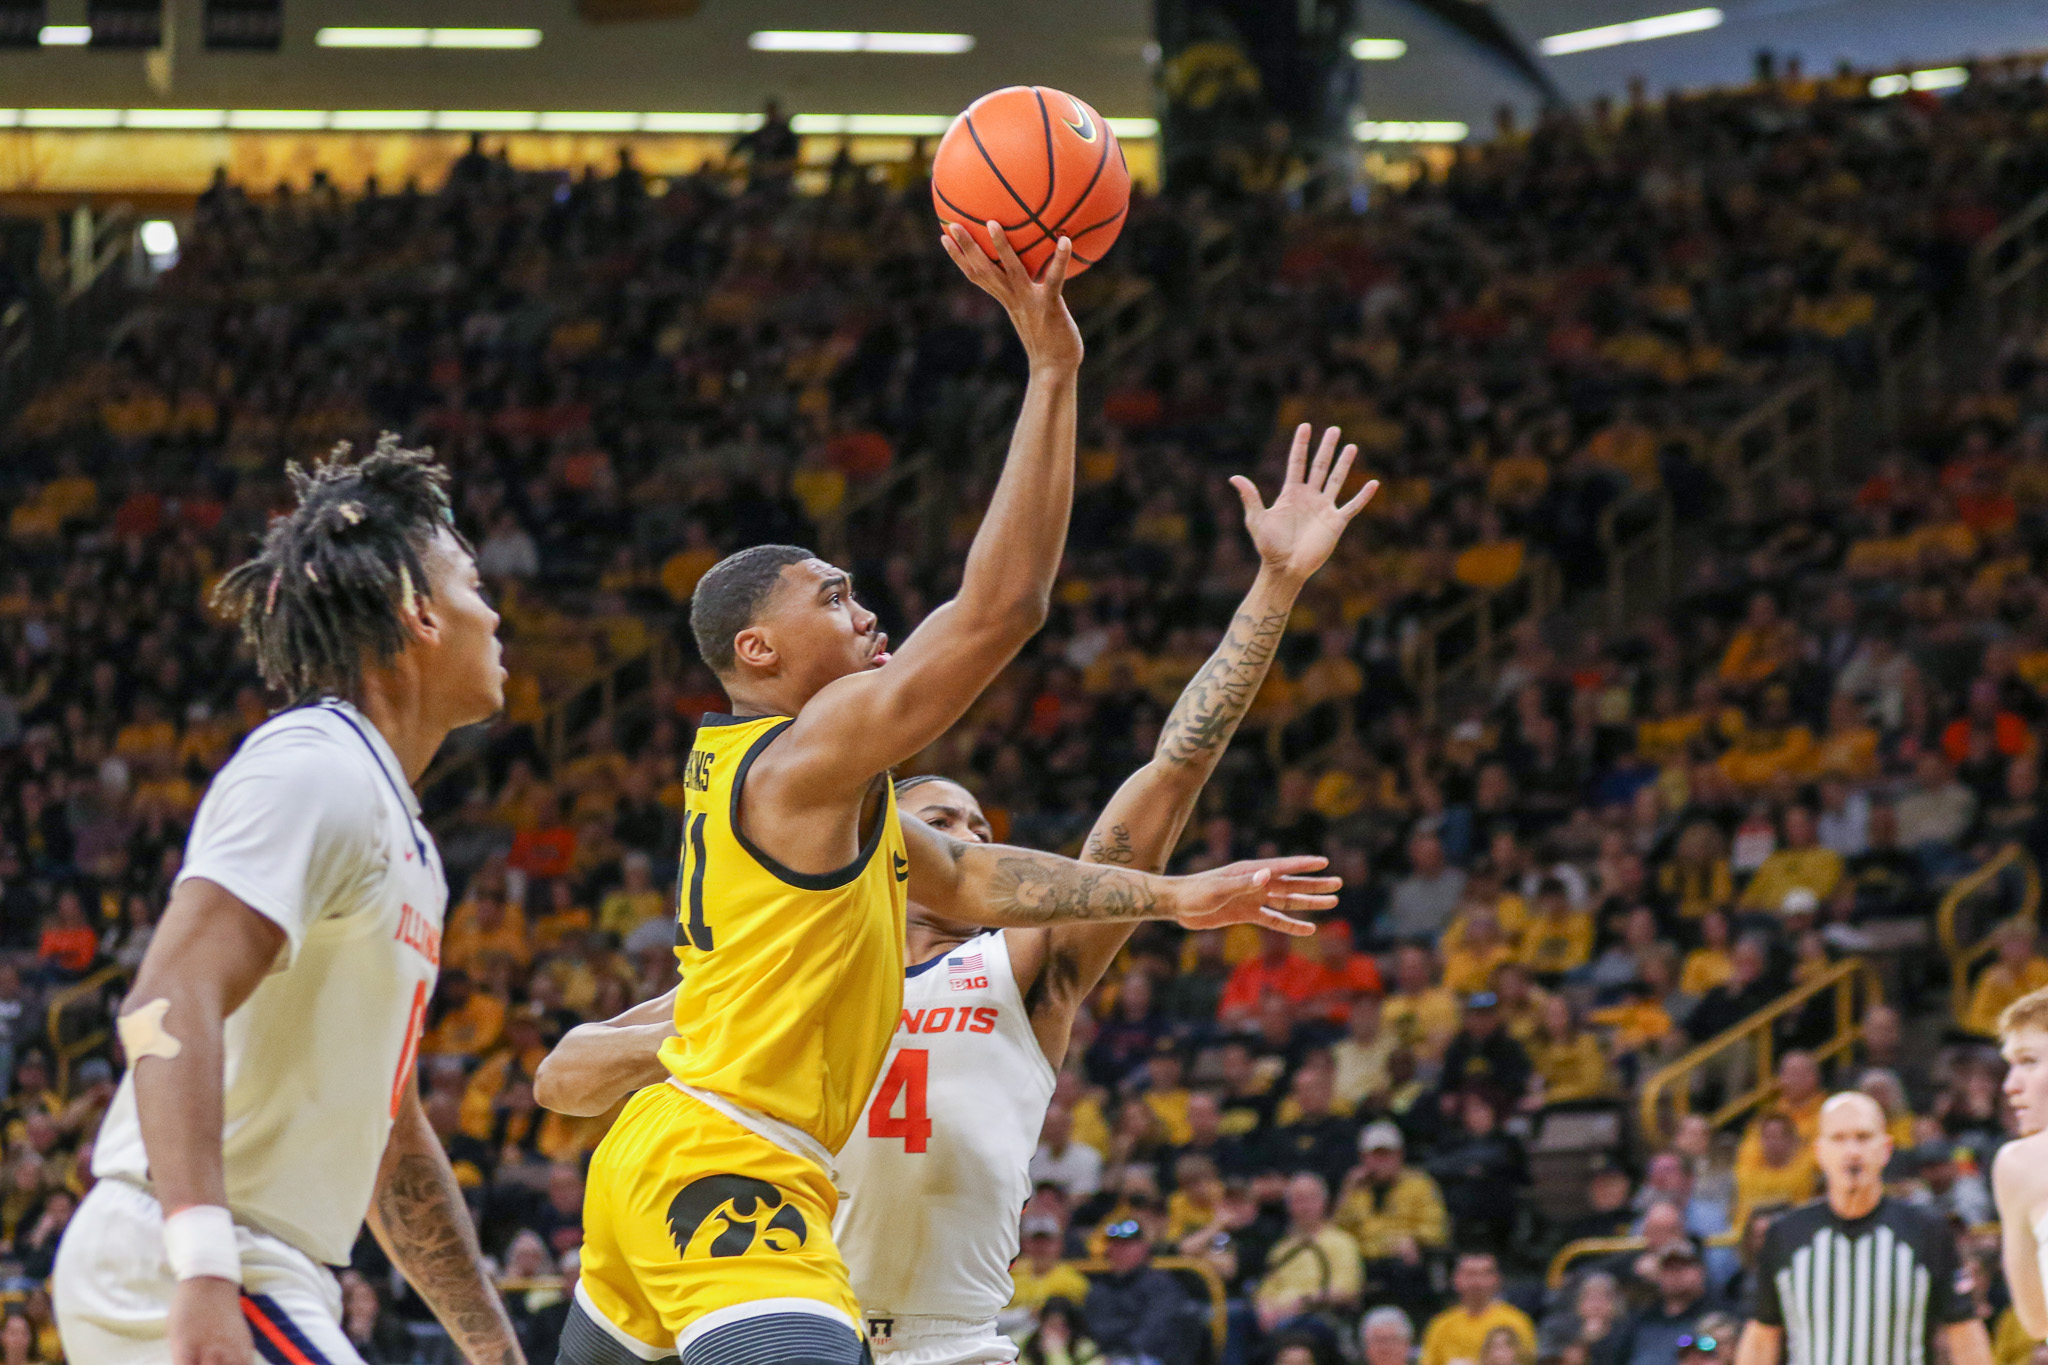 Iowa's Tony Perkins (11) releases a shot during a game against Illinois on March 10, 2024 at Carver-Hawkeye Arena in Iowa City, Iowa. (Rob Howe/HN)